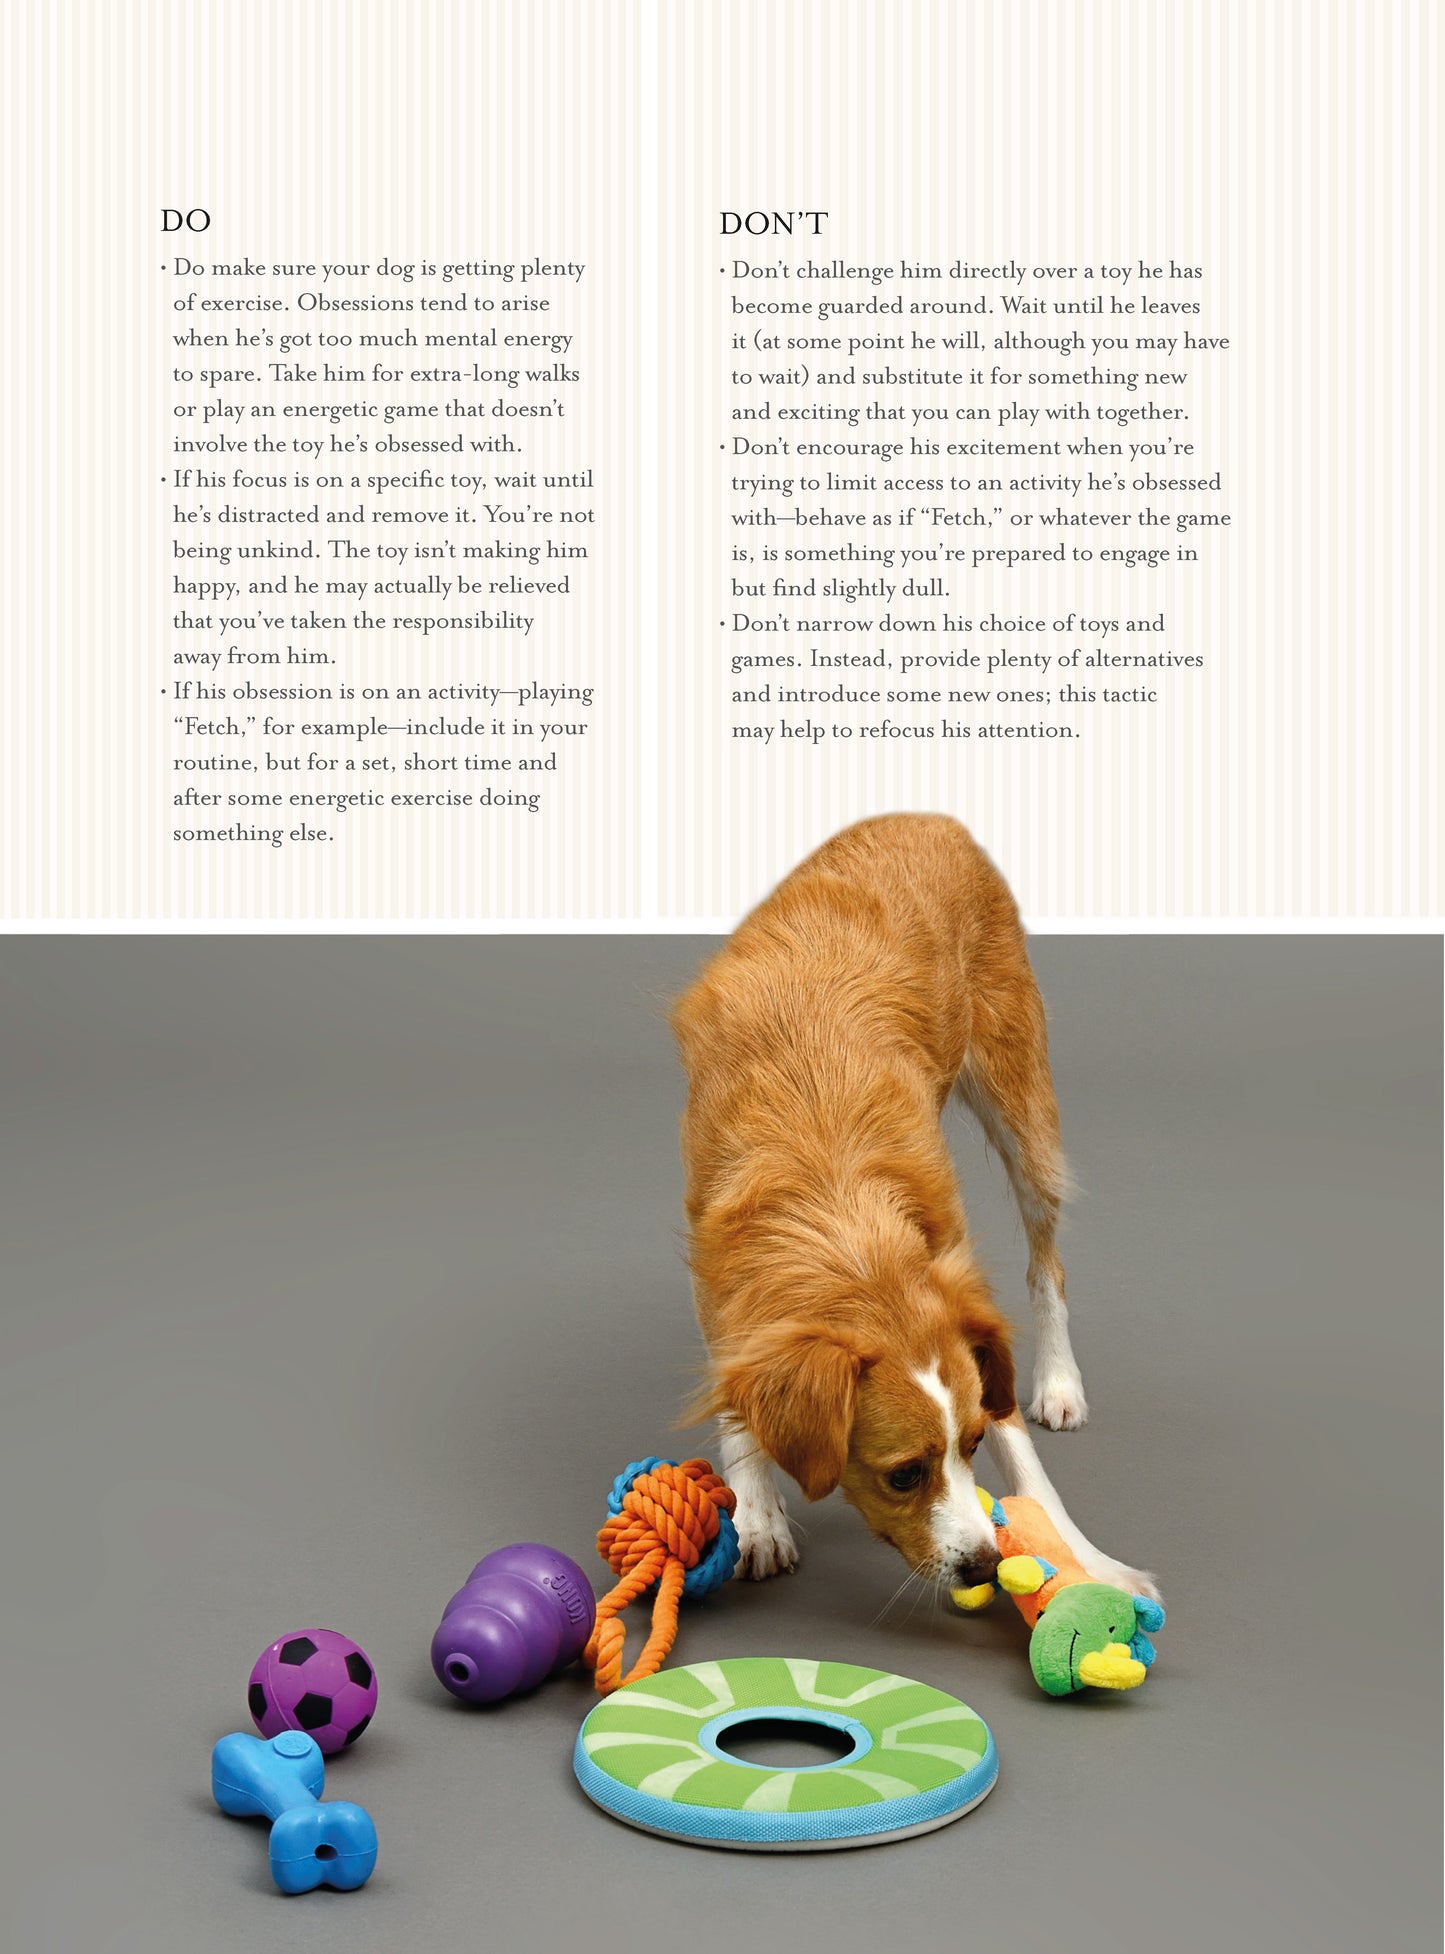 Fun & Games for a Smarter Dog